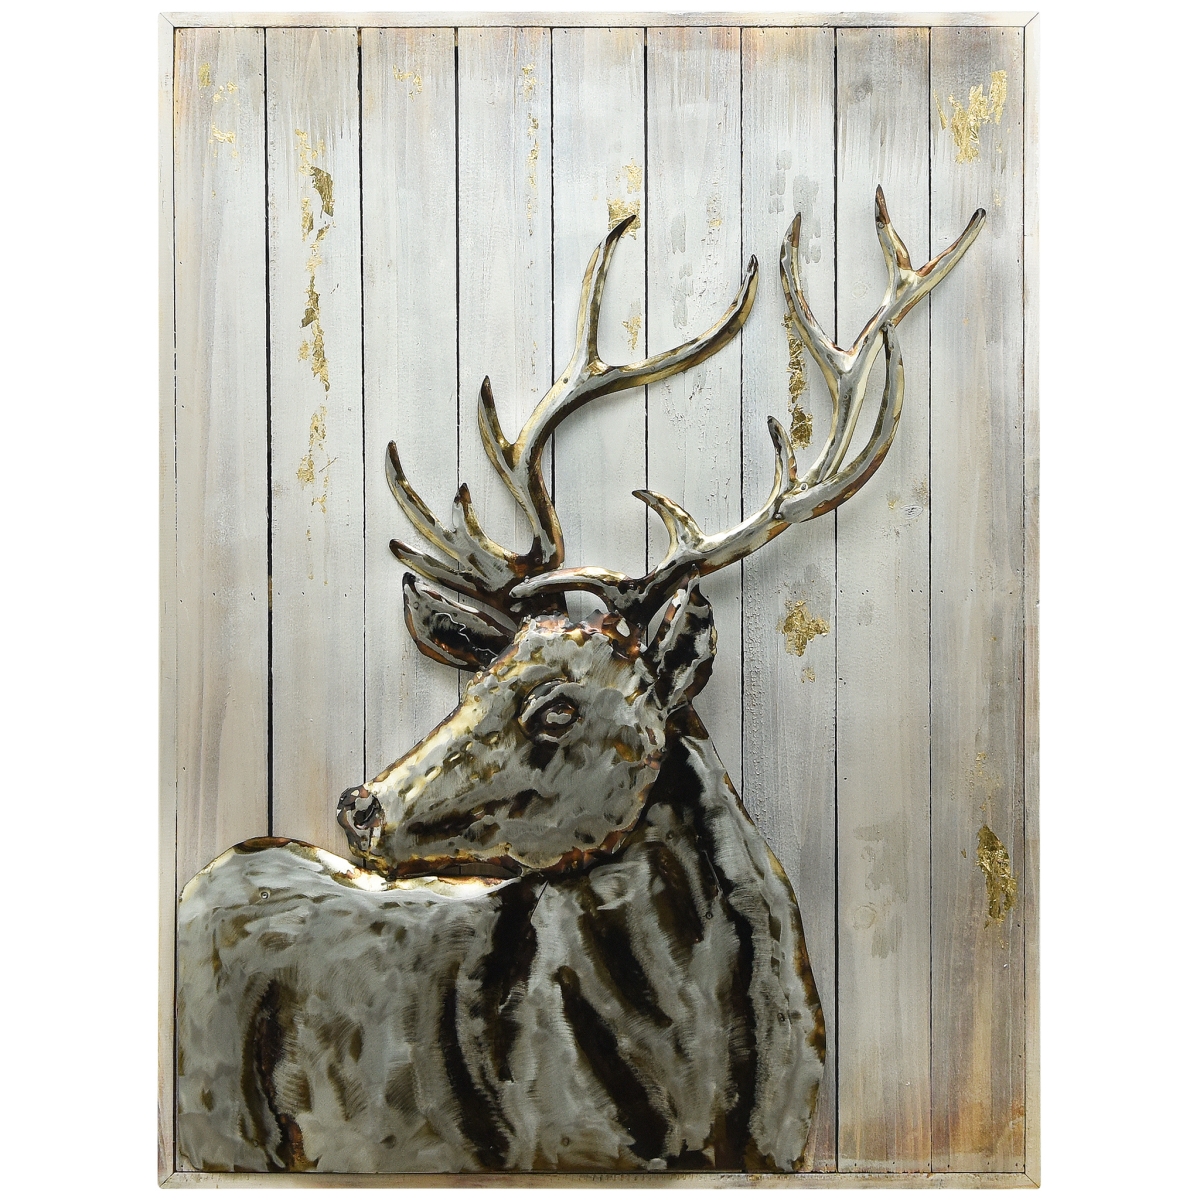 Empire Art Direct PMO-180306-4030 40 x 30 in. Deer 2 Hand Painted Primo Mixed Media Iron Wall Sculpture on Slatted Solid Wood 3D Metal Wall Art